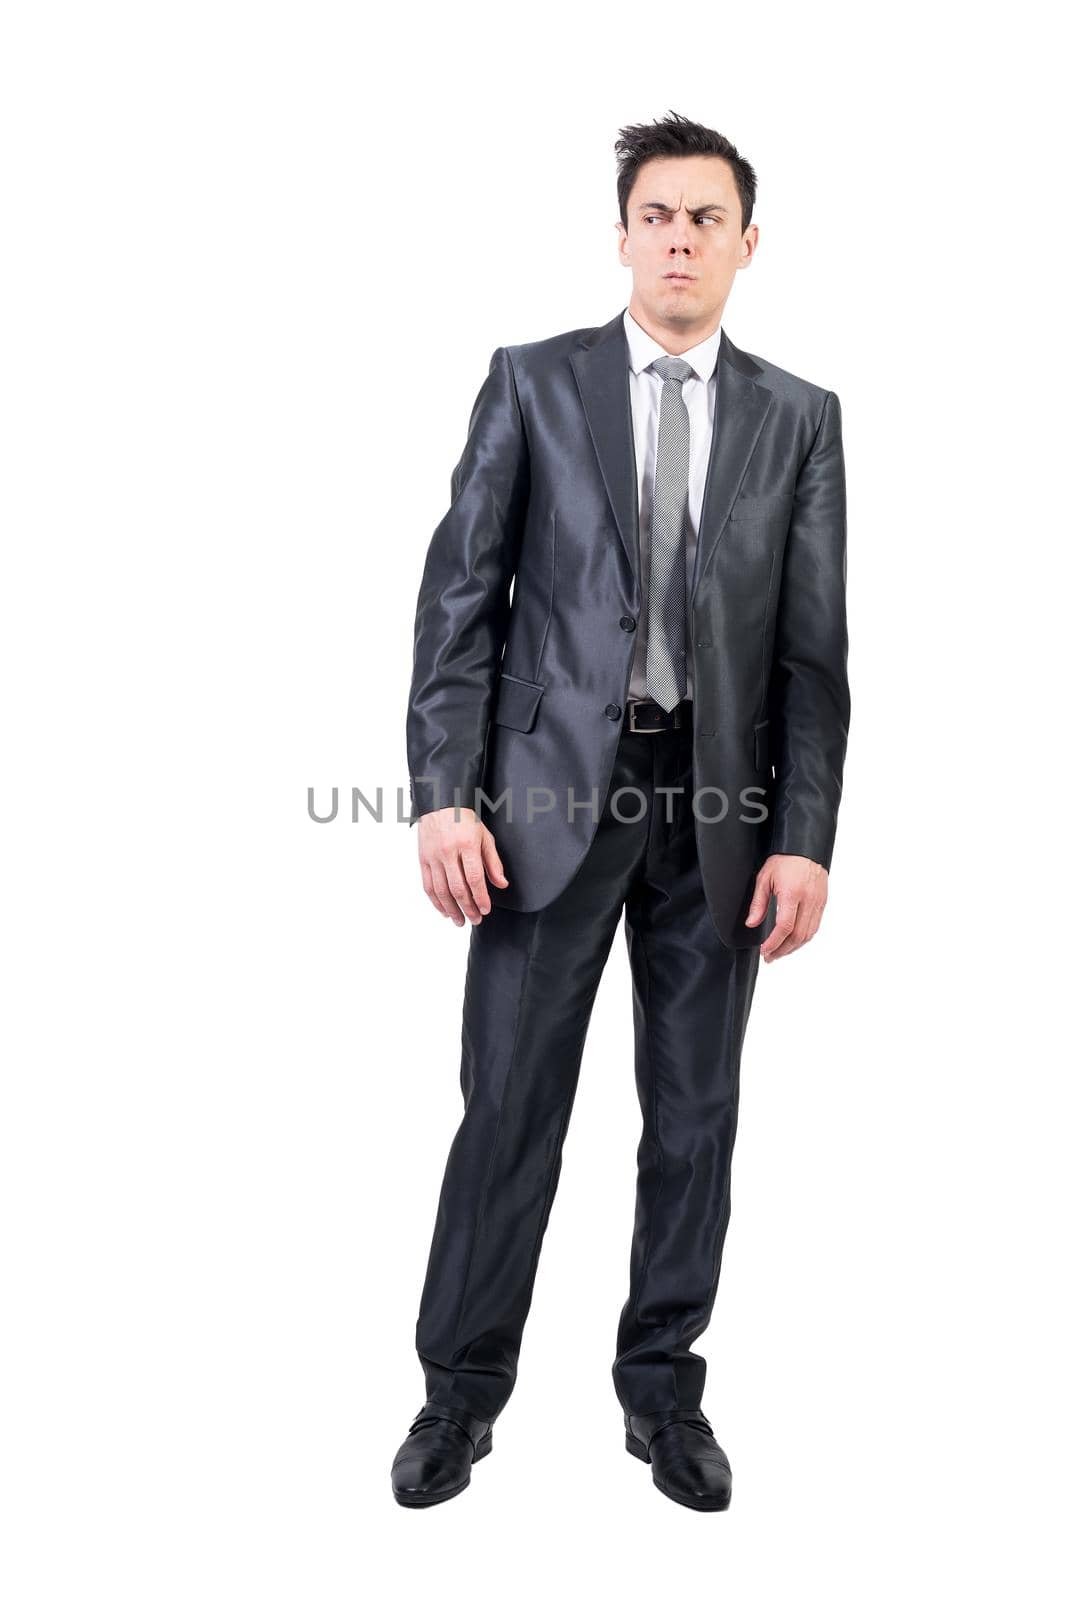 Full body of distrusted male in elegant suit looking away with doubtful face expression isolated on white background in studio